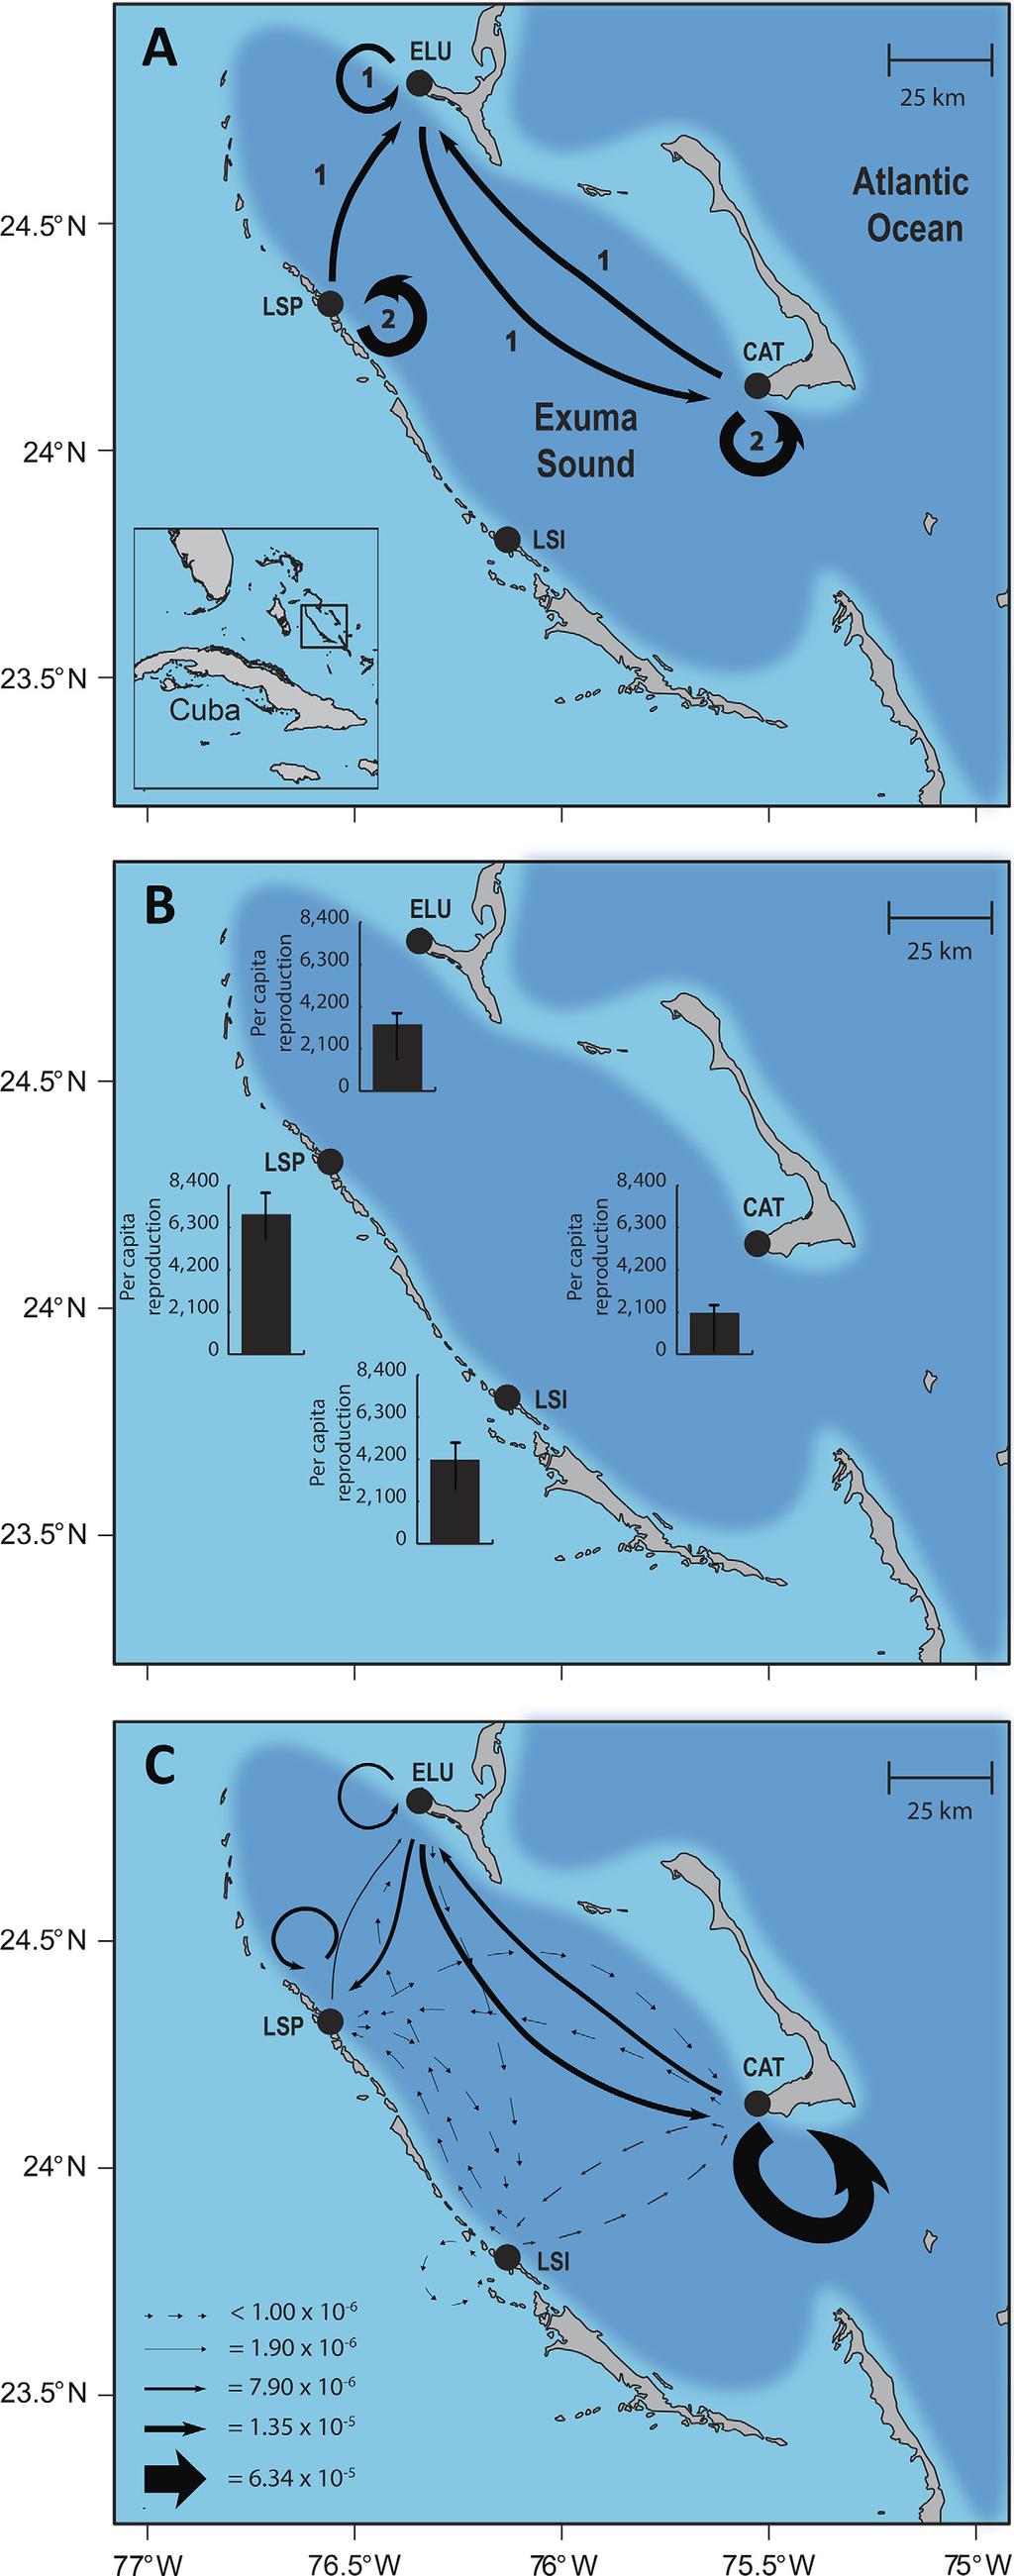 June 2018 INTEGRATING DEMOGRAPHY AND CONNECTIVITY 1425 appreciable number of eggs produced at Cat Island recruited to Eleuthera (and vice versa), suggesting that grand offspring of fish at Cat Island